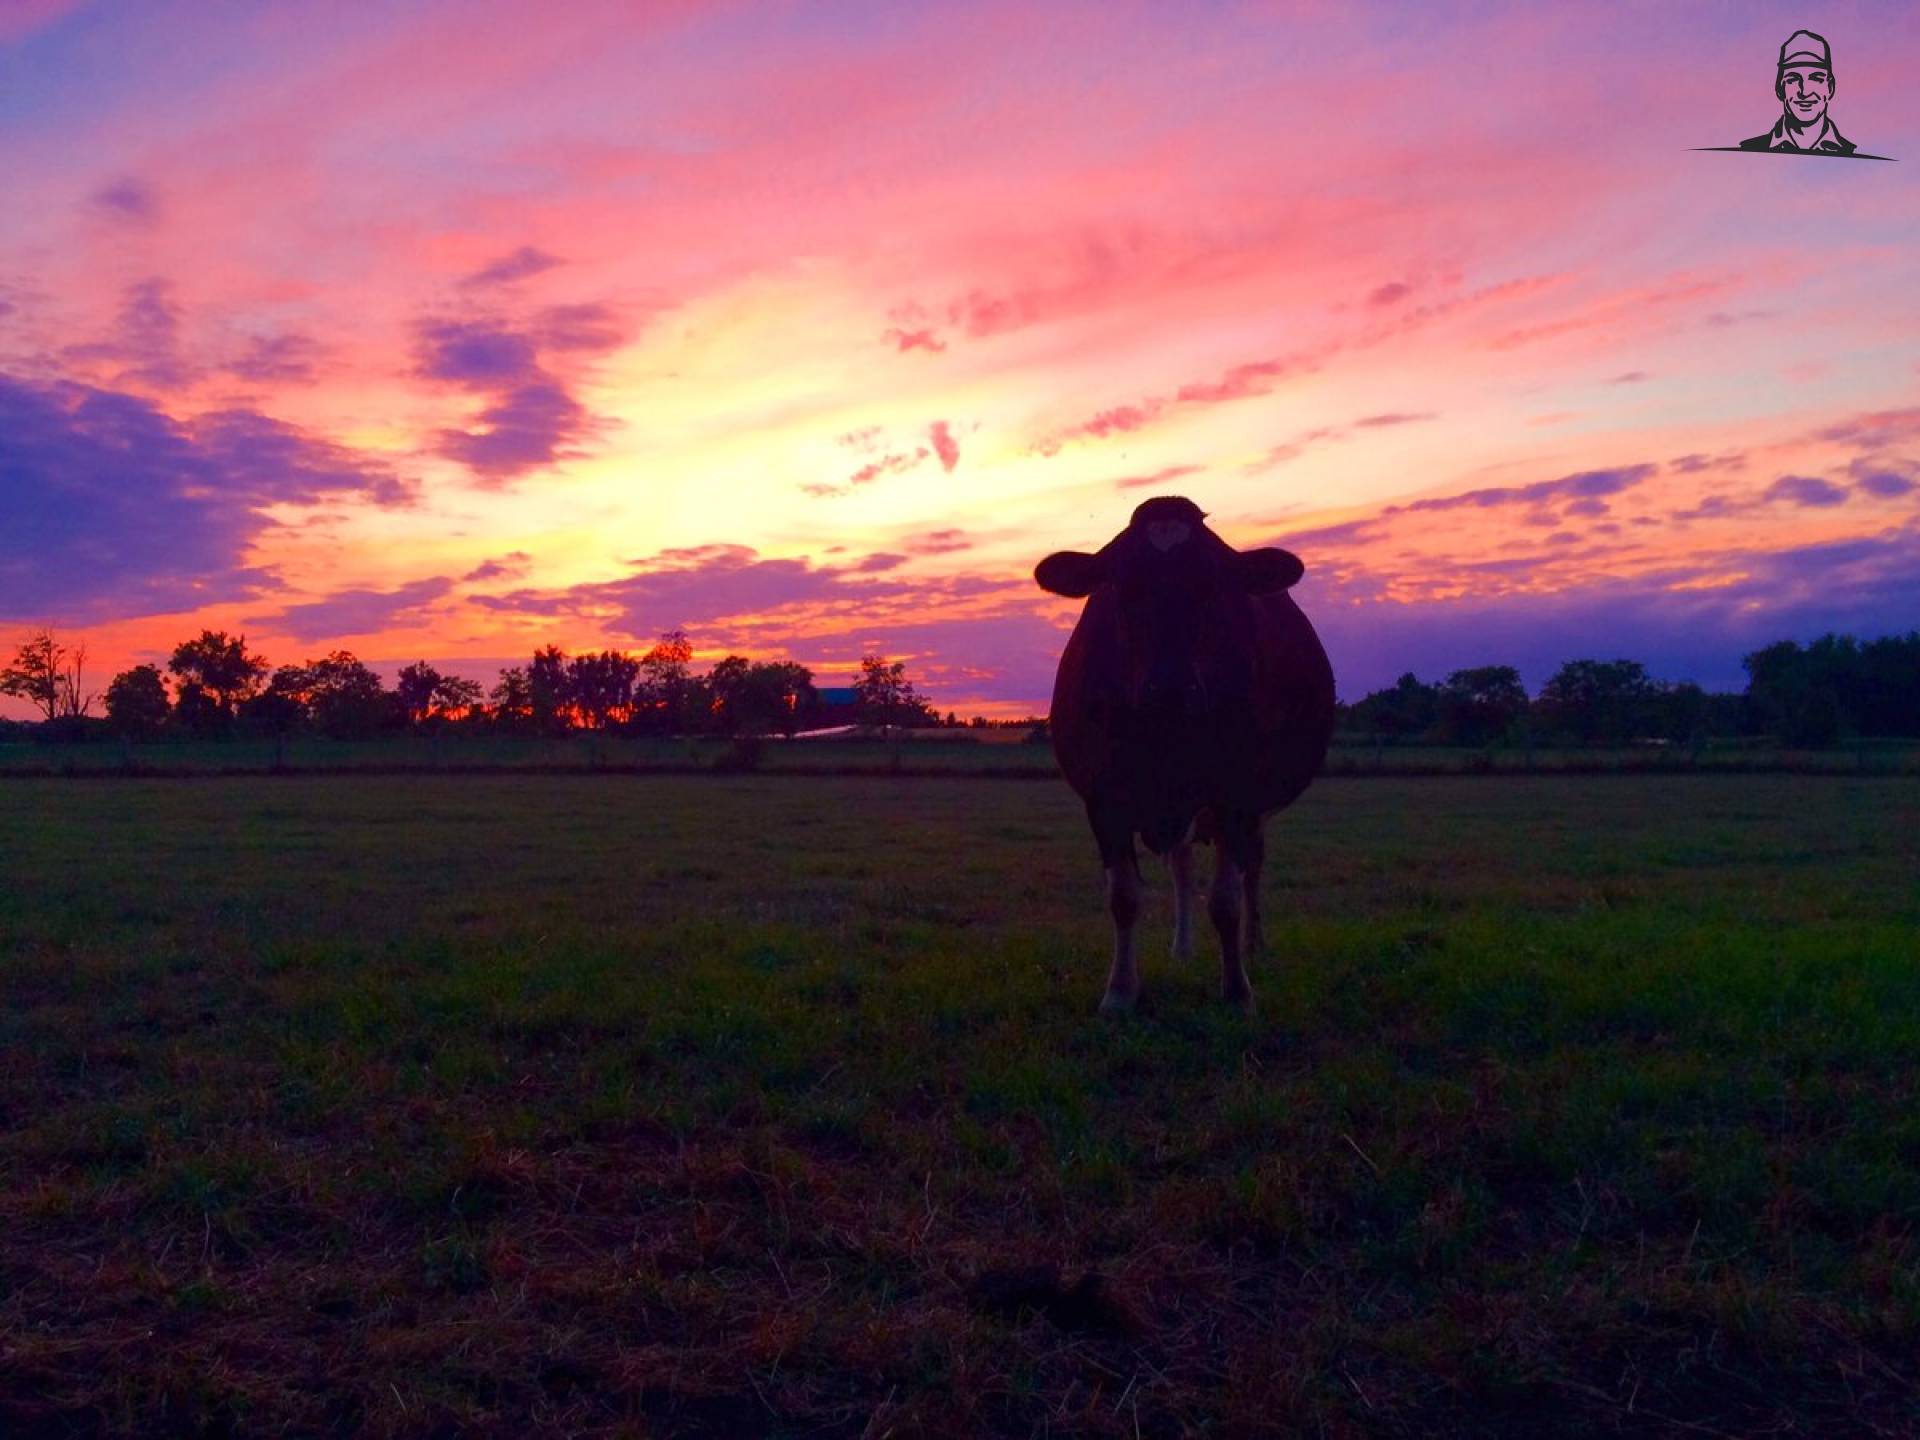 Lucky the cow out-standing in her field #farm365 #AgChat #sunset  van Nieuwsgrazer